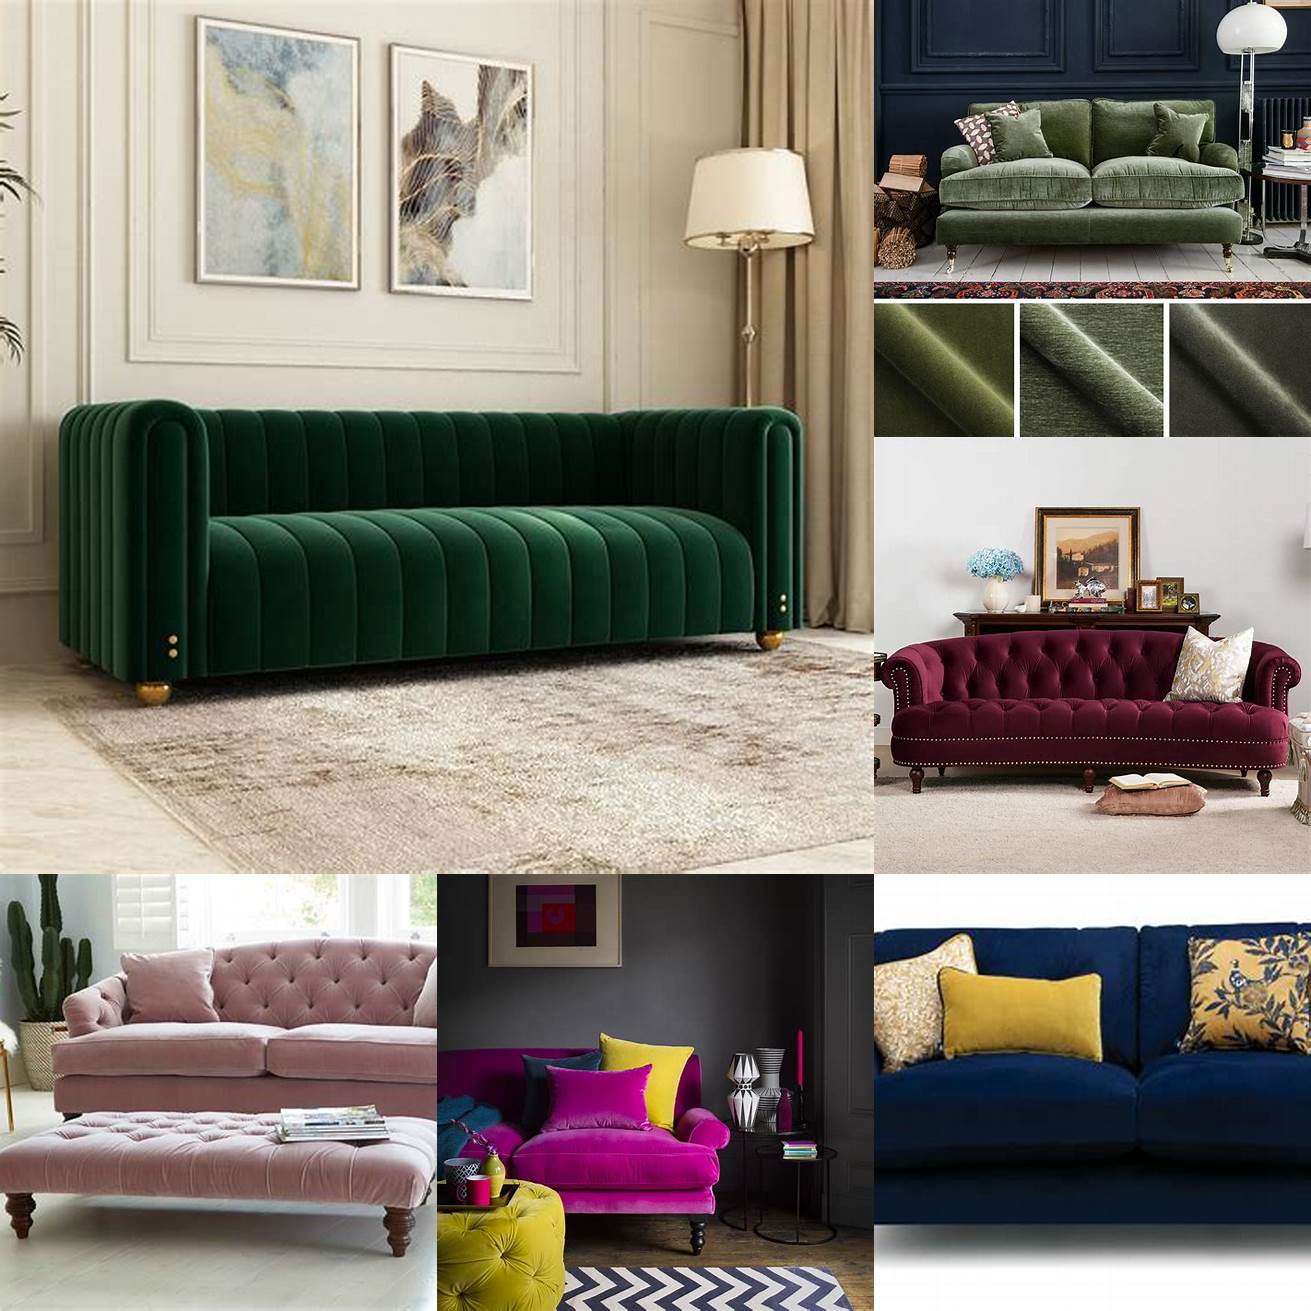 Velvet Velvet high back sofas are luxurious elegant and perfect for adding a touch of glam to your living space They come in various colors from rich emerald and navy to soft pink and lavender